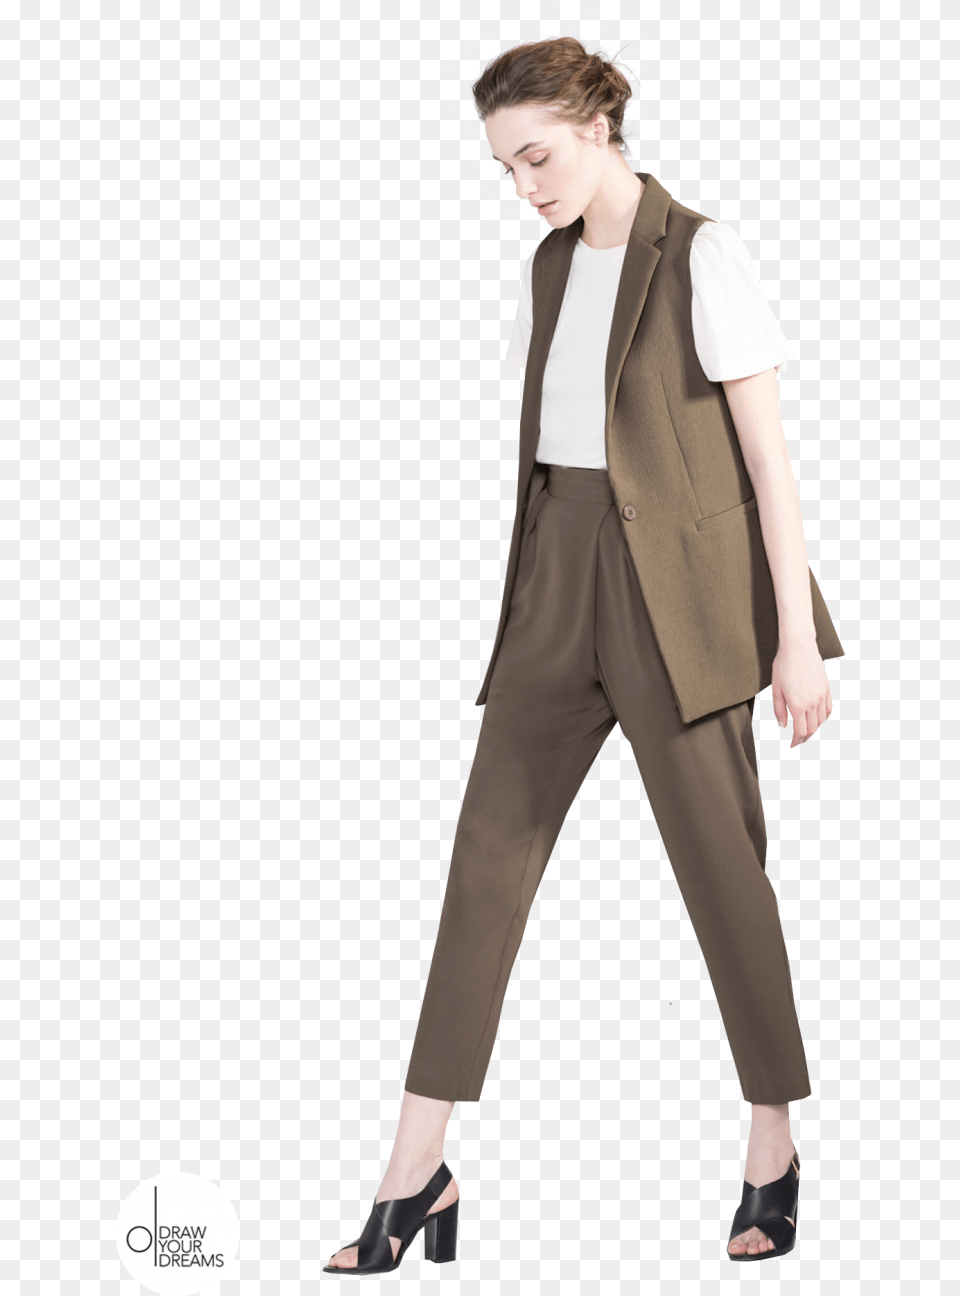 Drawyourdreams People Cutout Cut Out People People, Vest, Suit, Person, Formal Wear Free Png Download